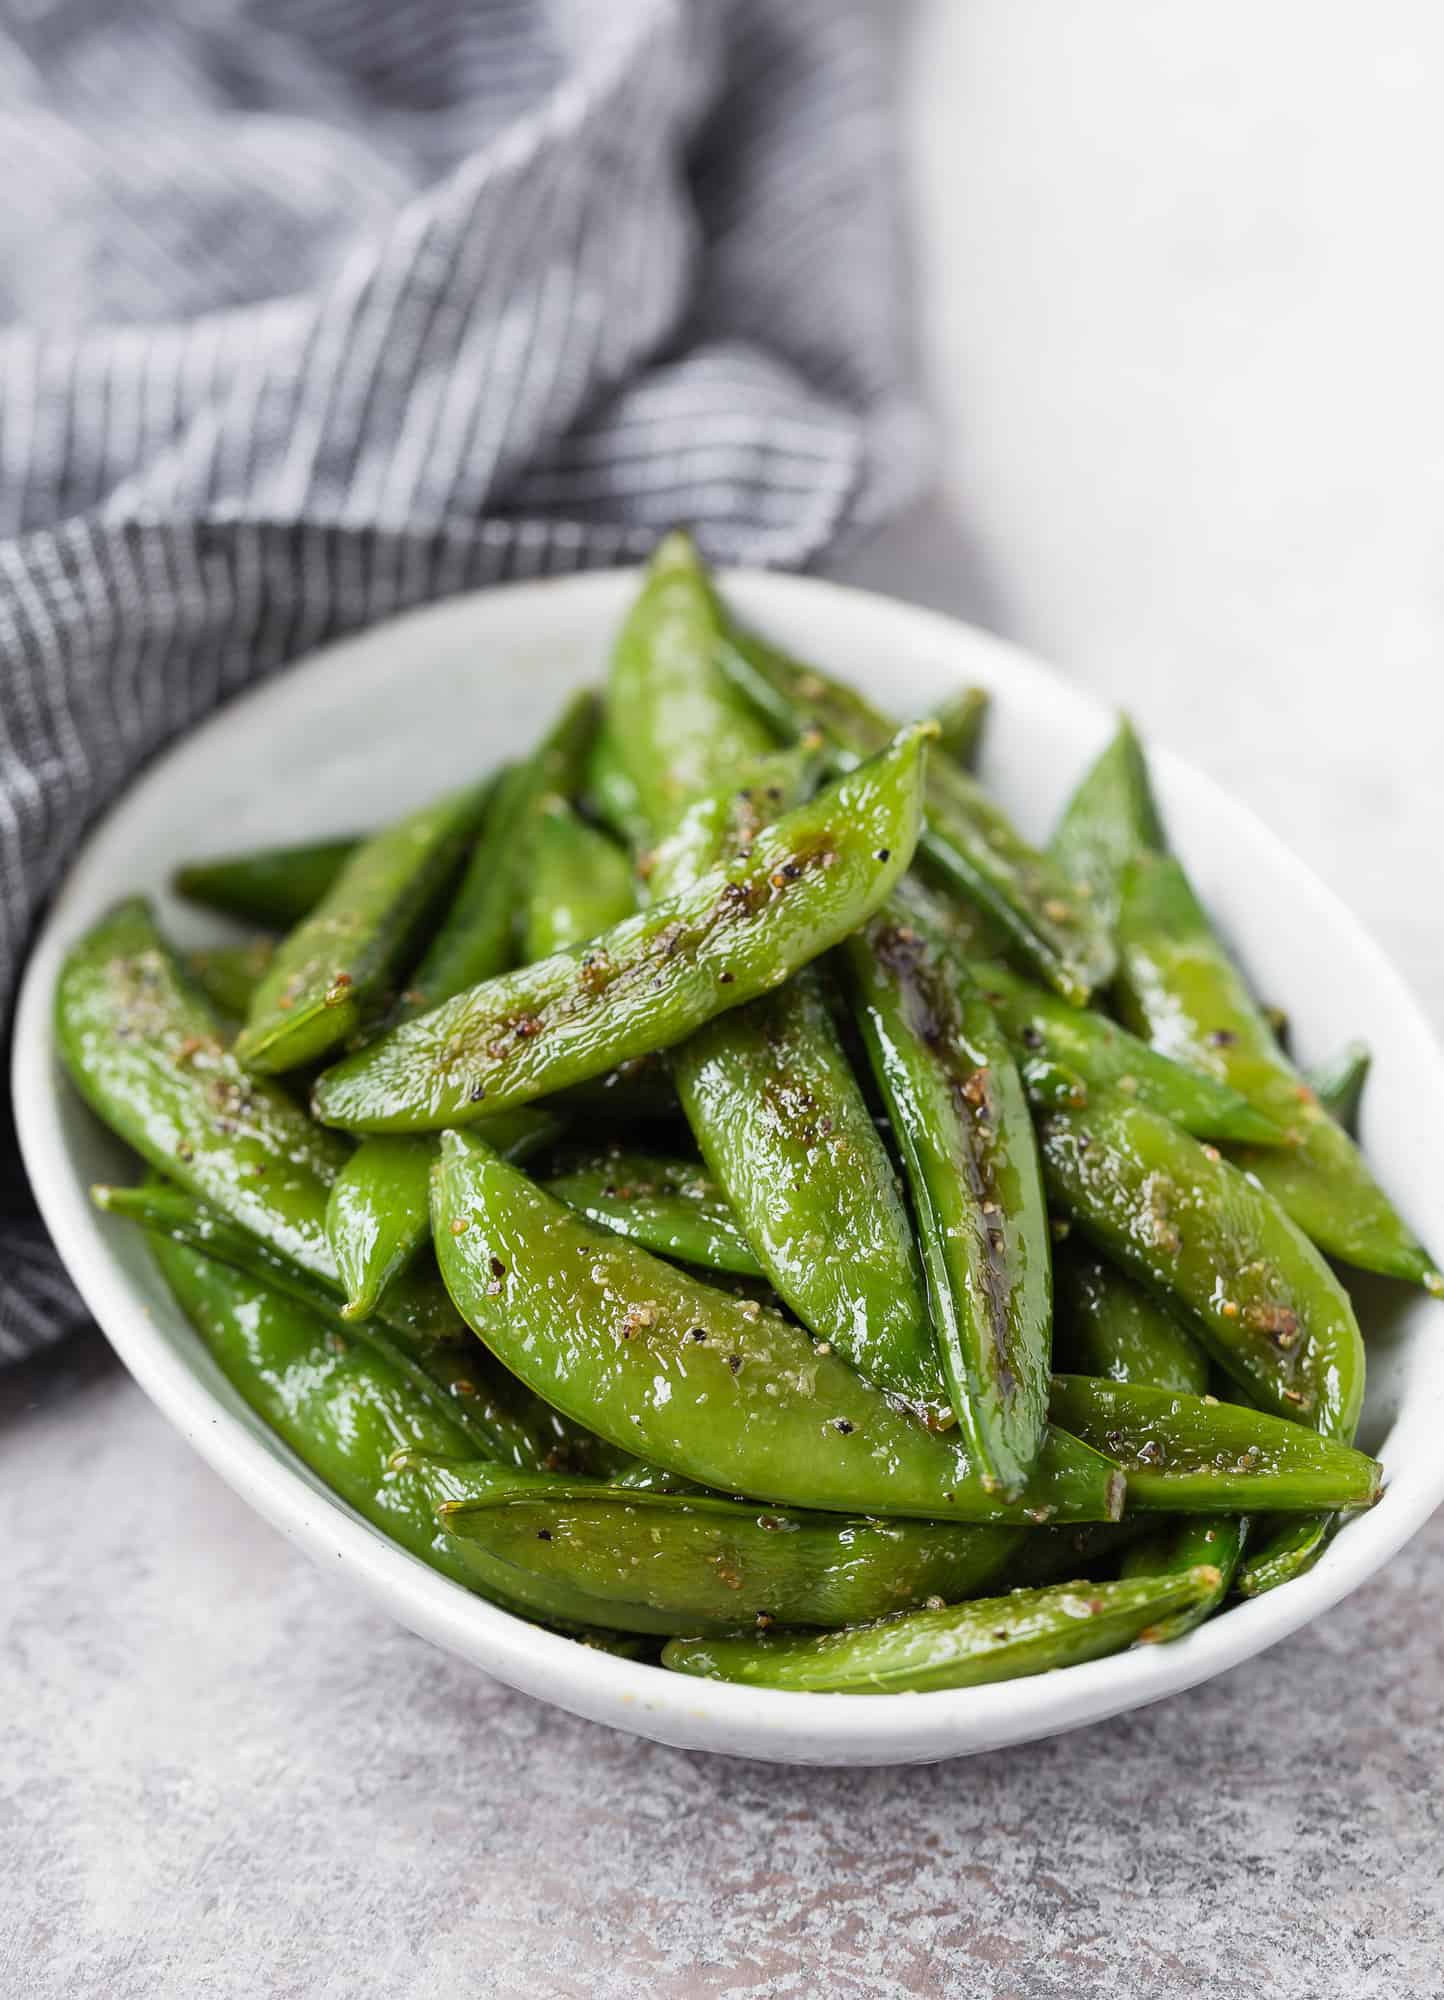 Snap peas in a small white oval bowl.